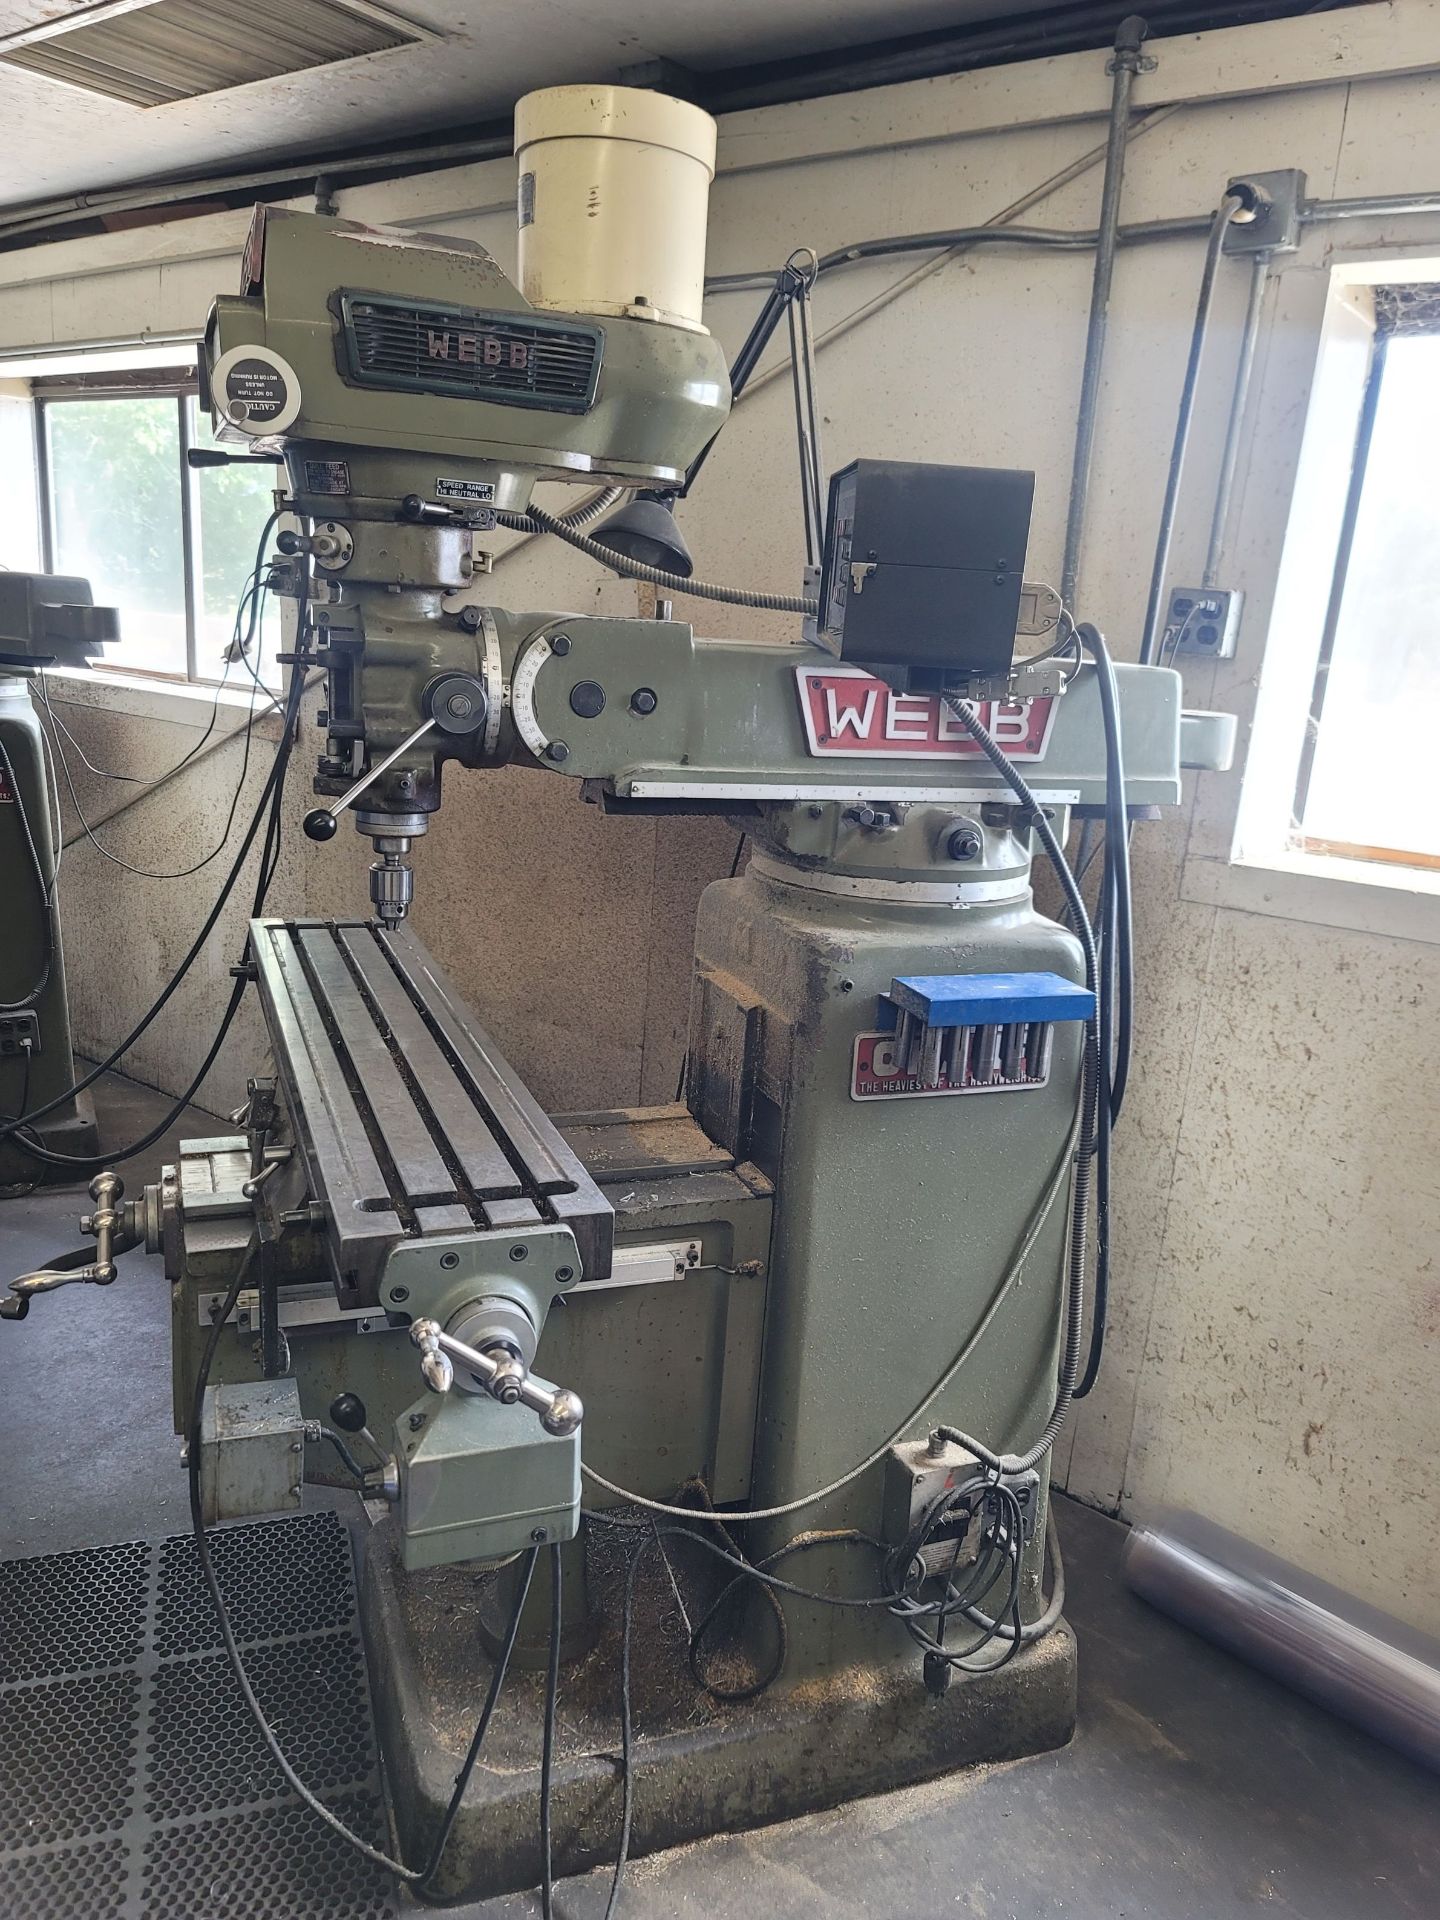 WEBB 3VK VERTICAL MILL, 50" X 10" TABLE, POWER FEED, COLLETS SARGON DRO, S/N 803171 - Image 4 of 7